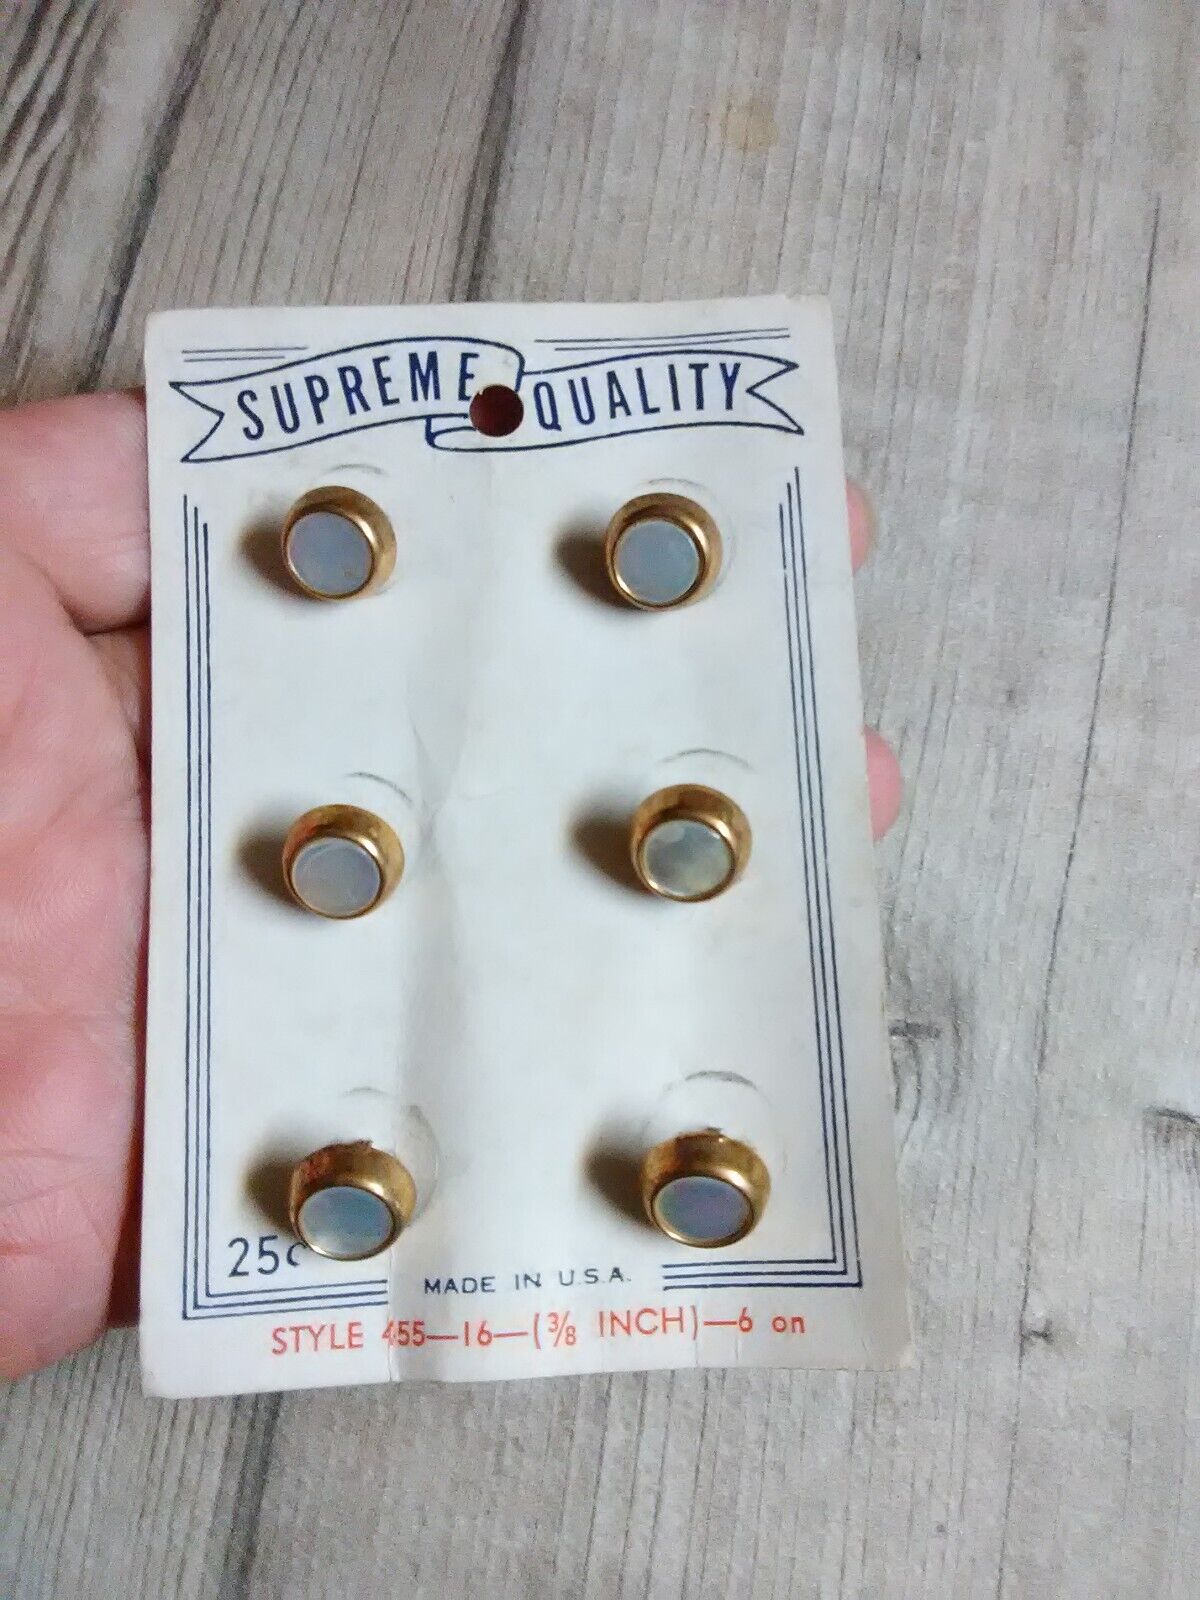 Vintage Supreme Quality buttons - on card